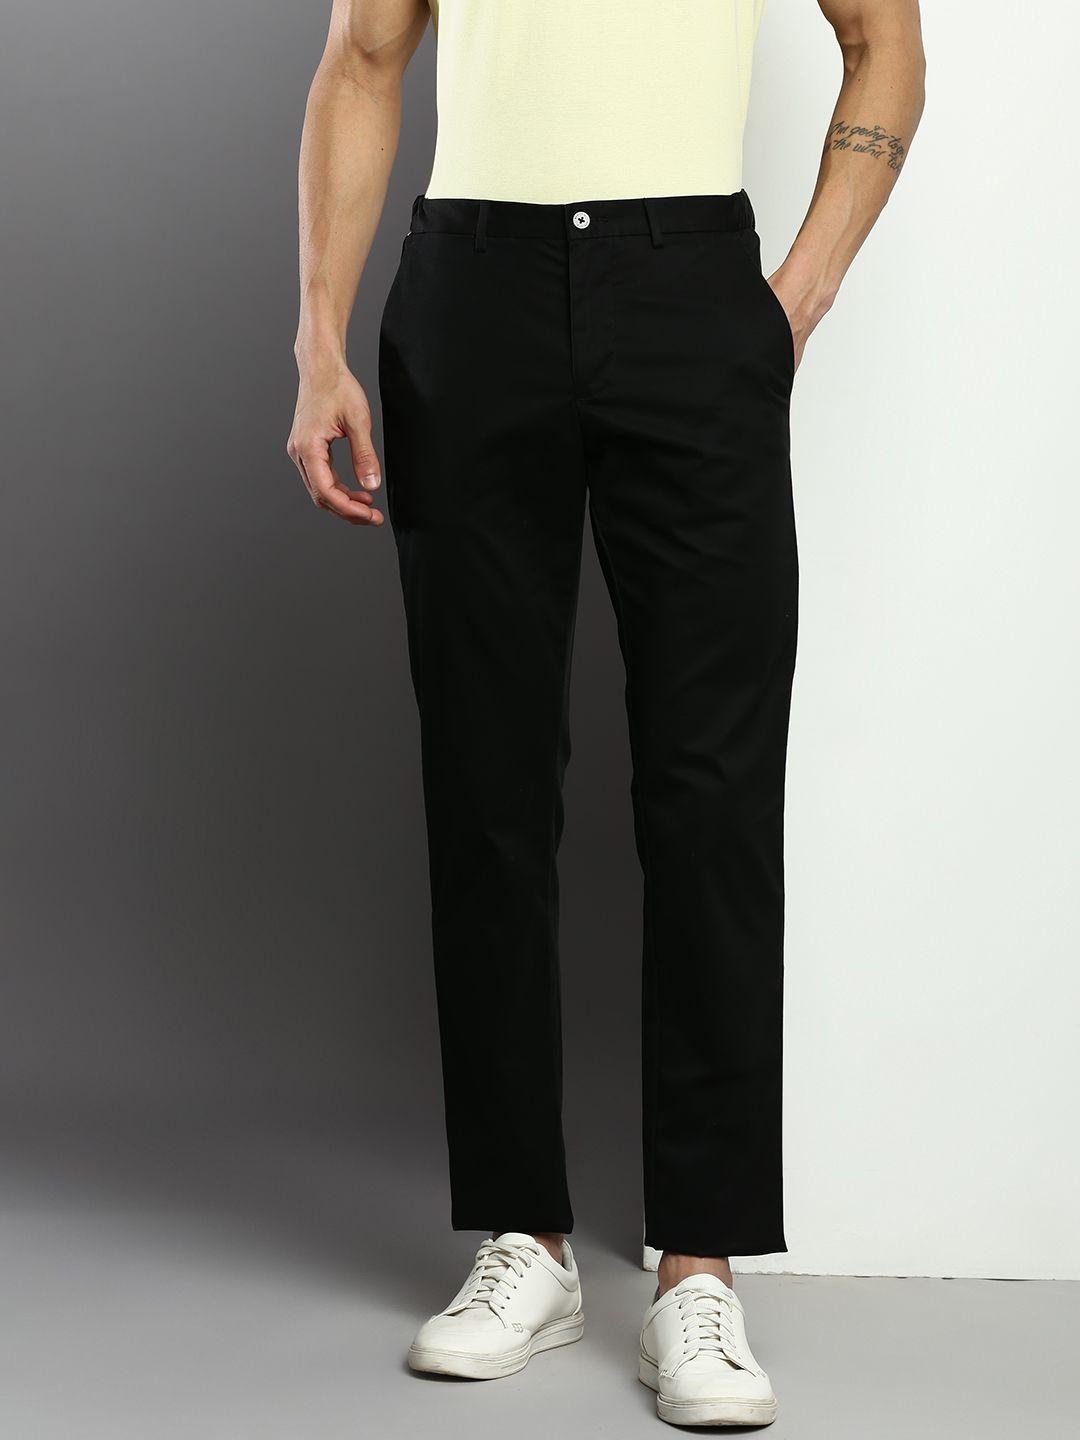 tommy-hilfiger-men-chinos-trousers